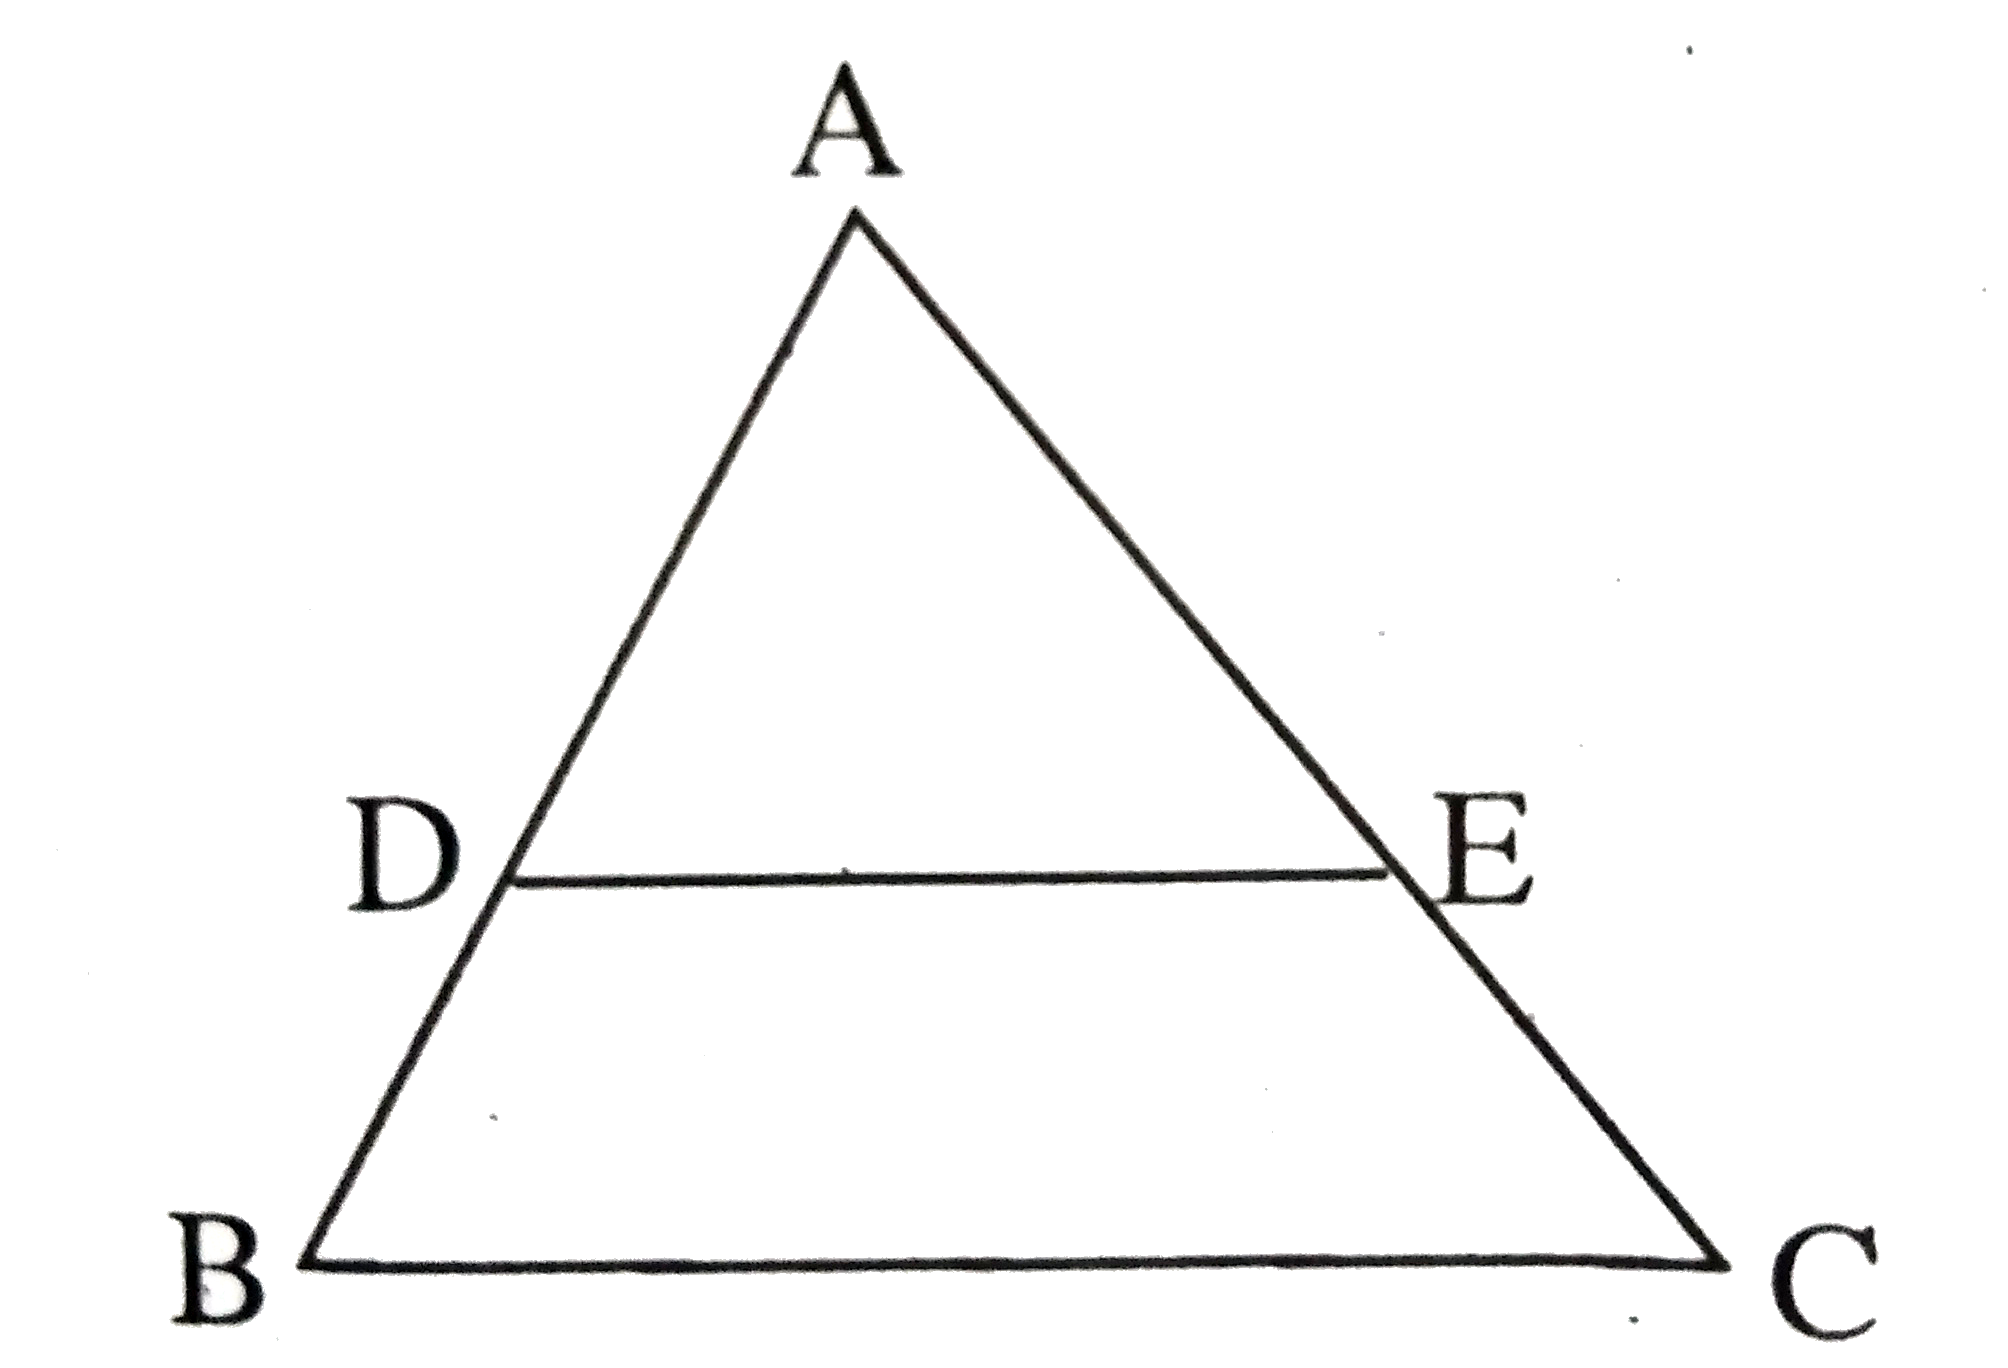 Two similar triangles are always congruent.